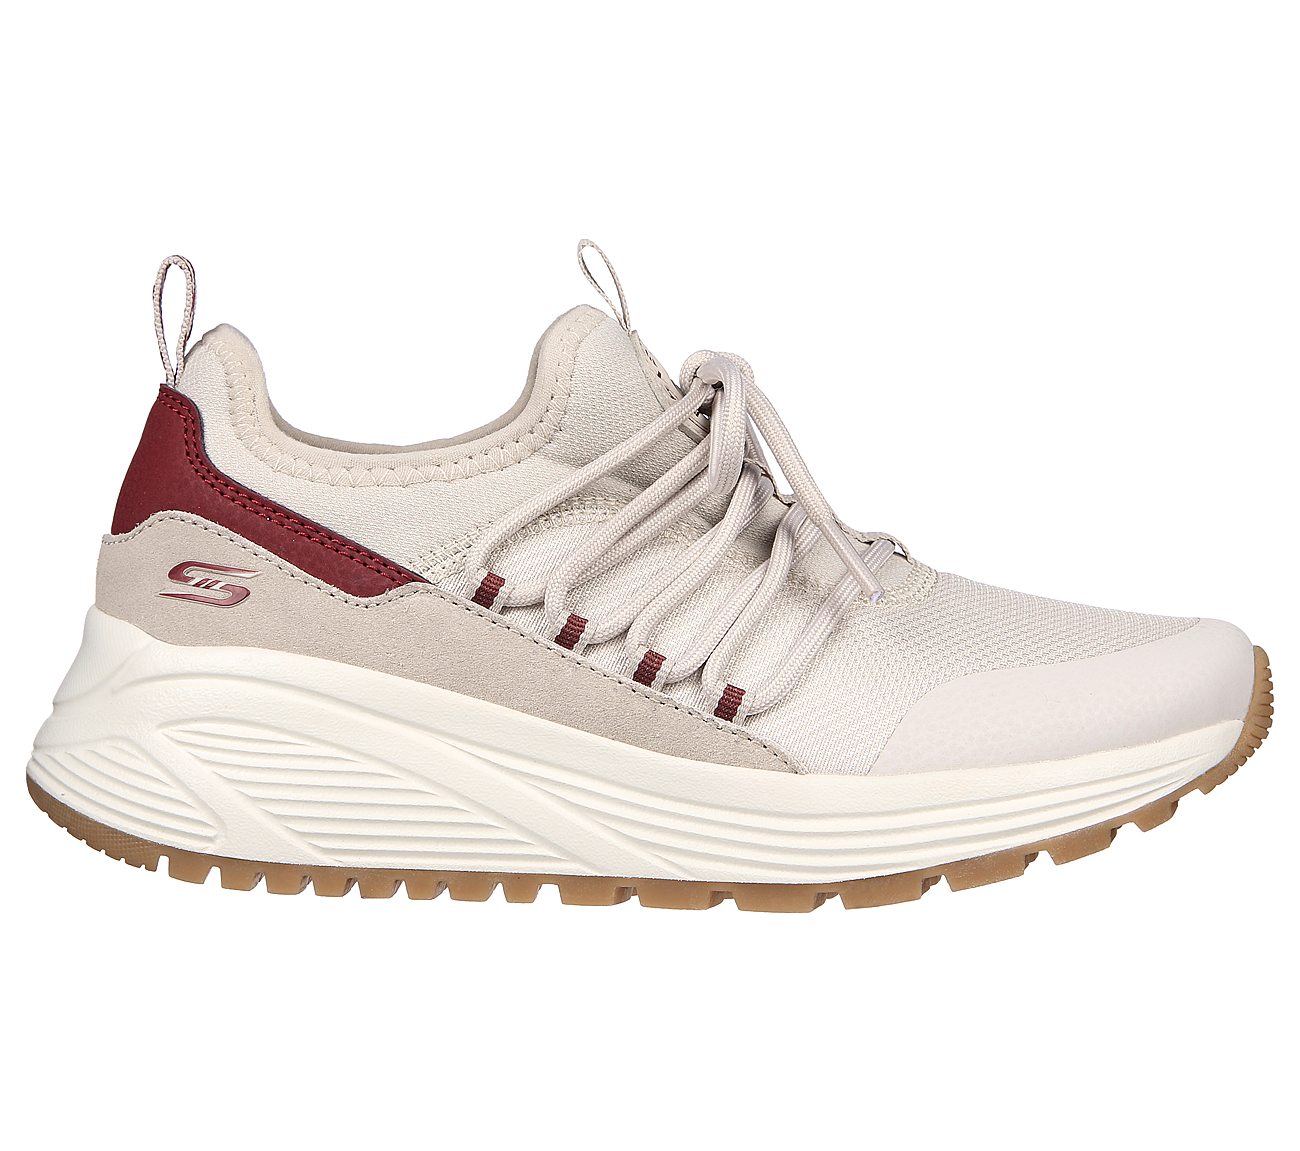 BOBS SPARROW 2.0-SONIC LUV, OFF WHITE Footwear Lateral View